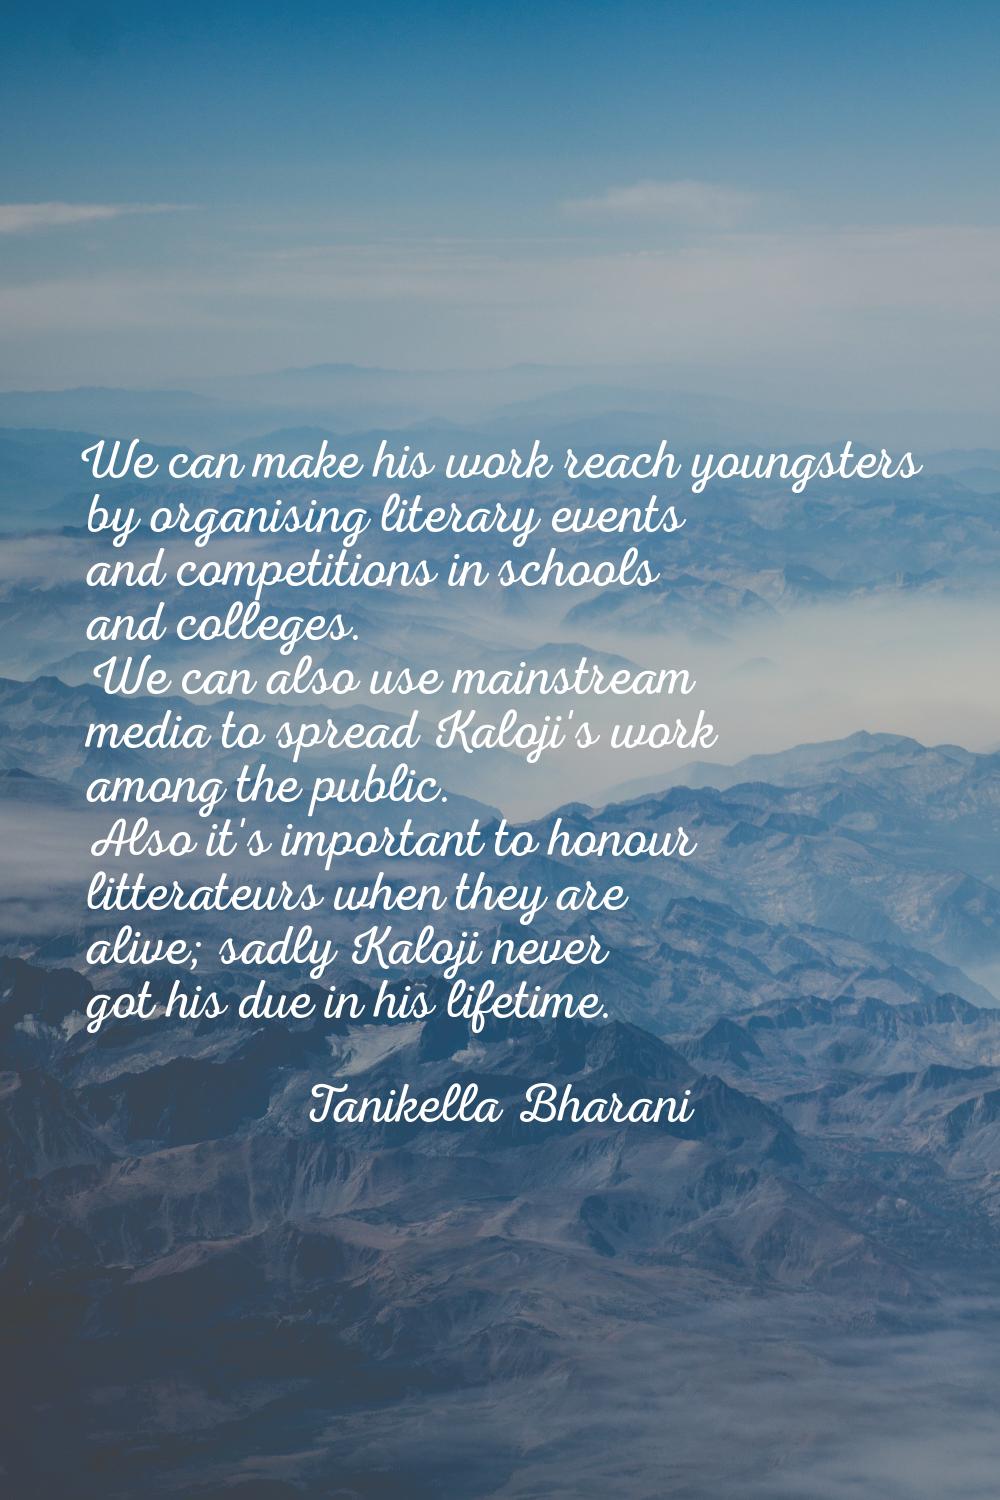 We can make his work reach youngsters by organising literary events and competitions in schools and